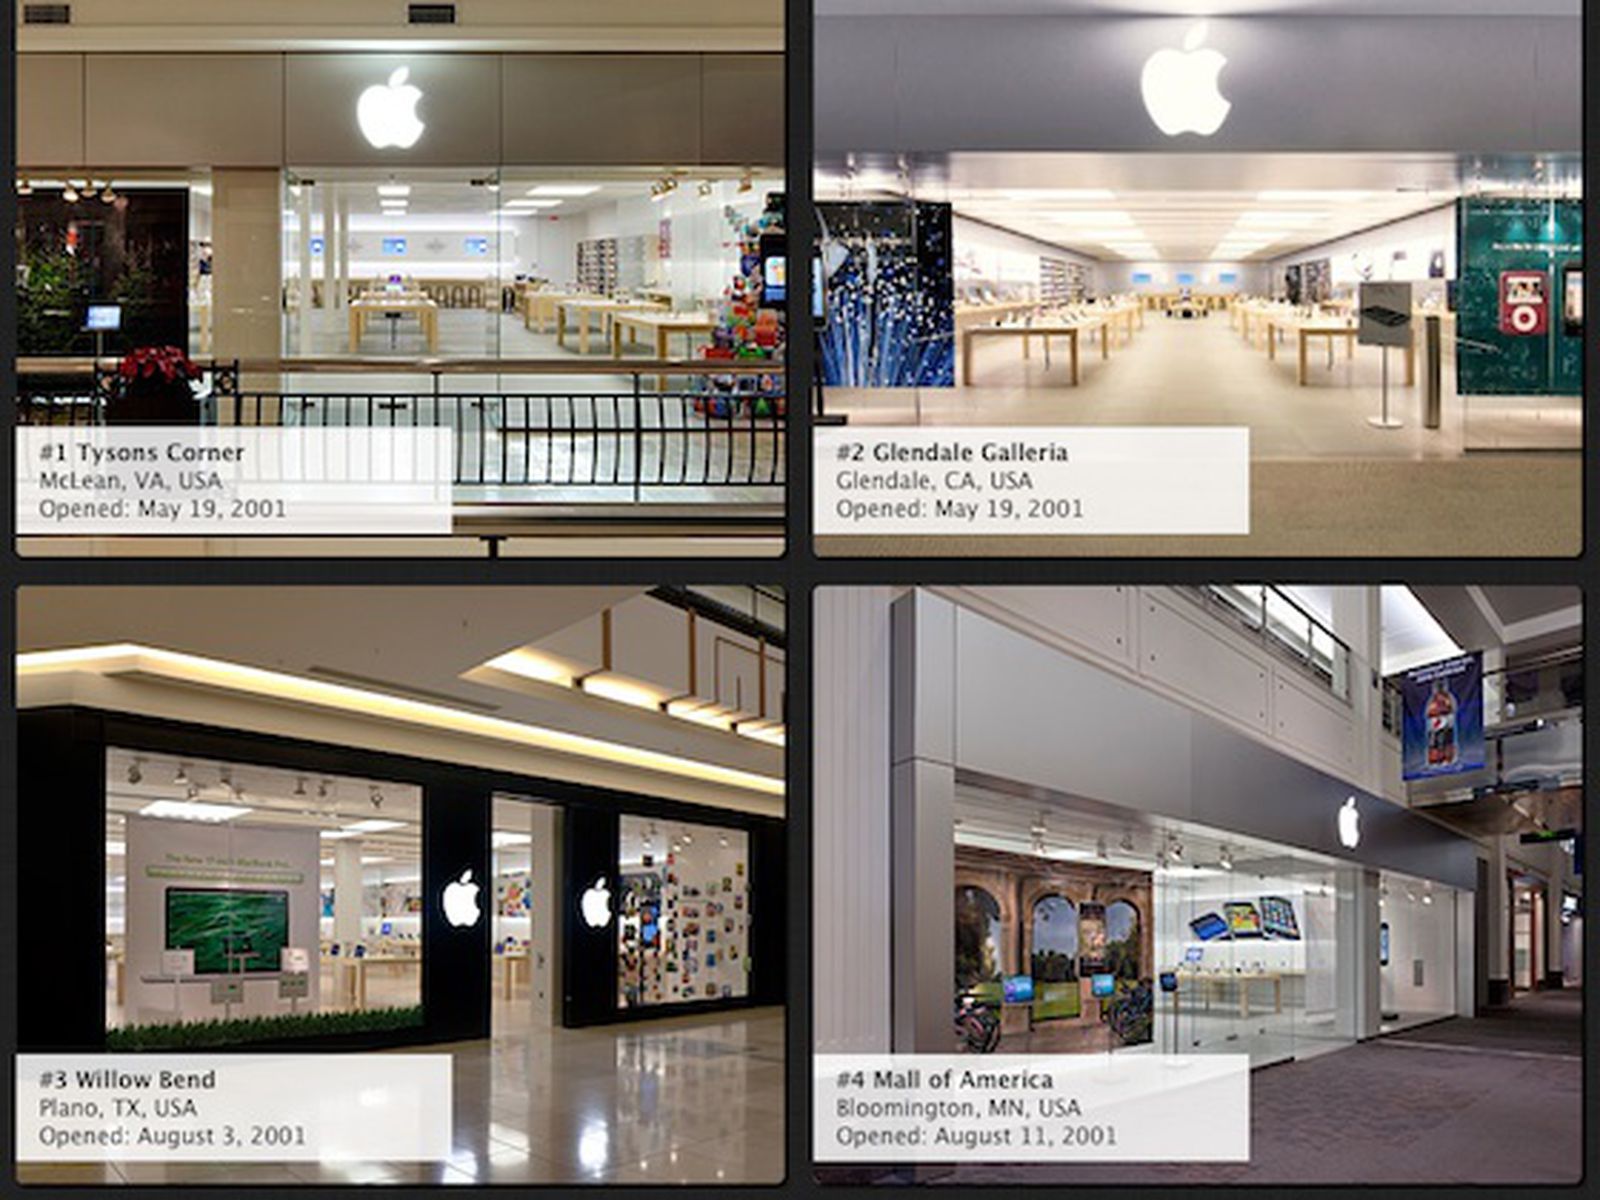 Photos: Every Apple Store in the United States